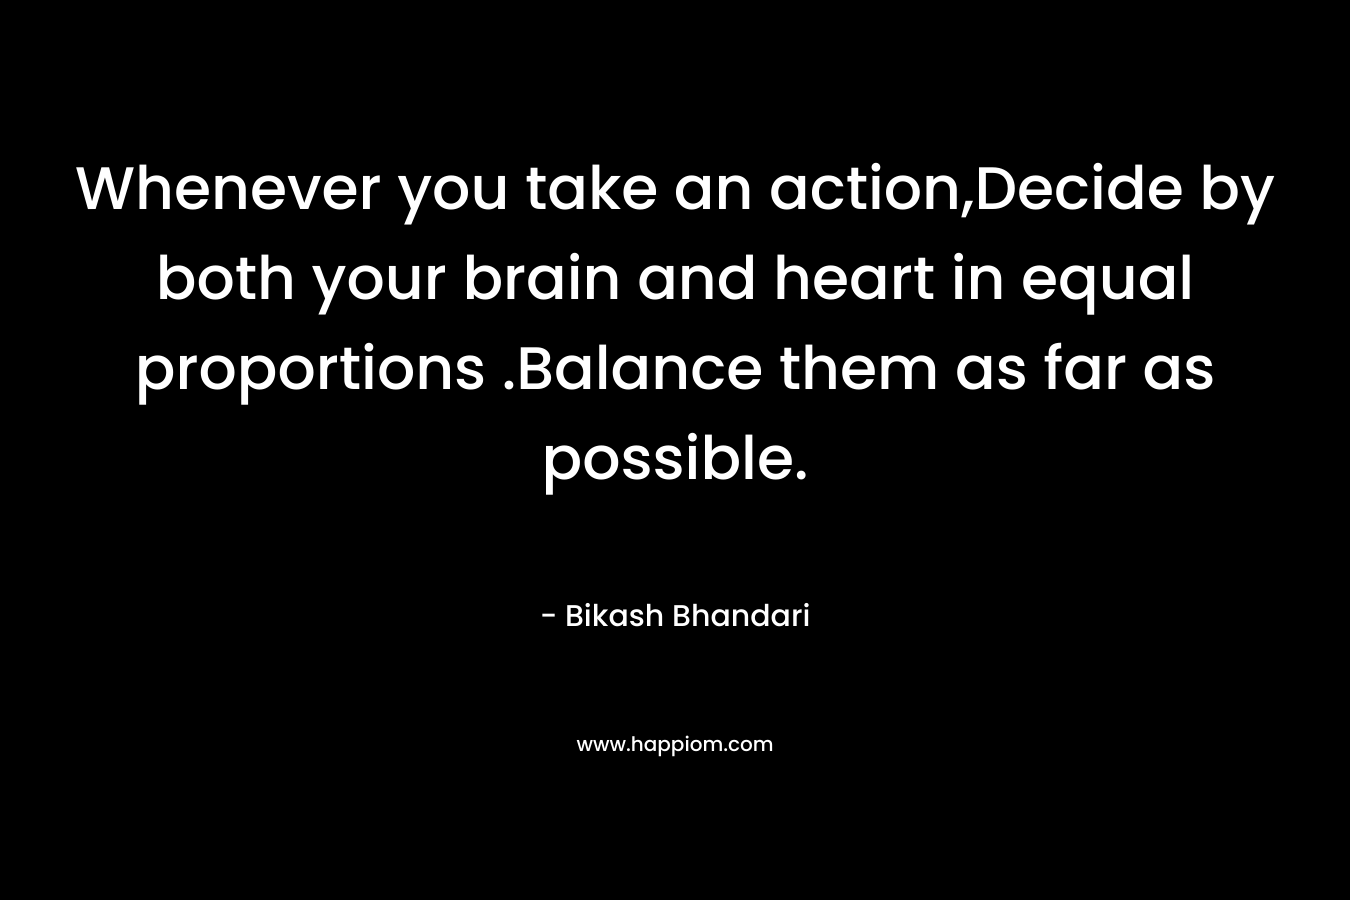 Whenever you take an action,Decide by both your brain and heart in equal proportions .Balance them as far as possible.